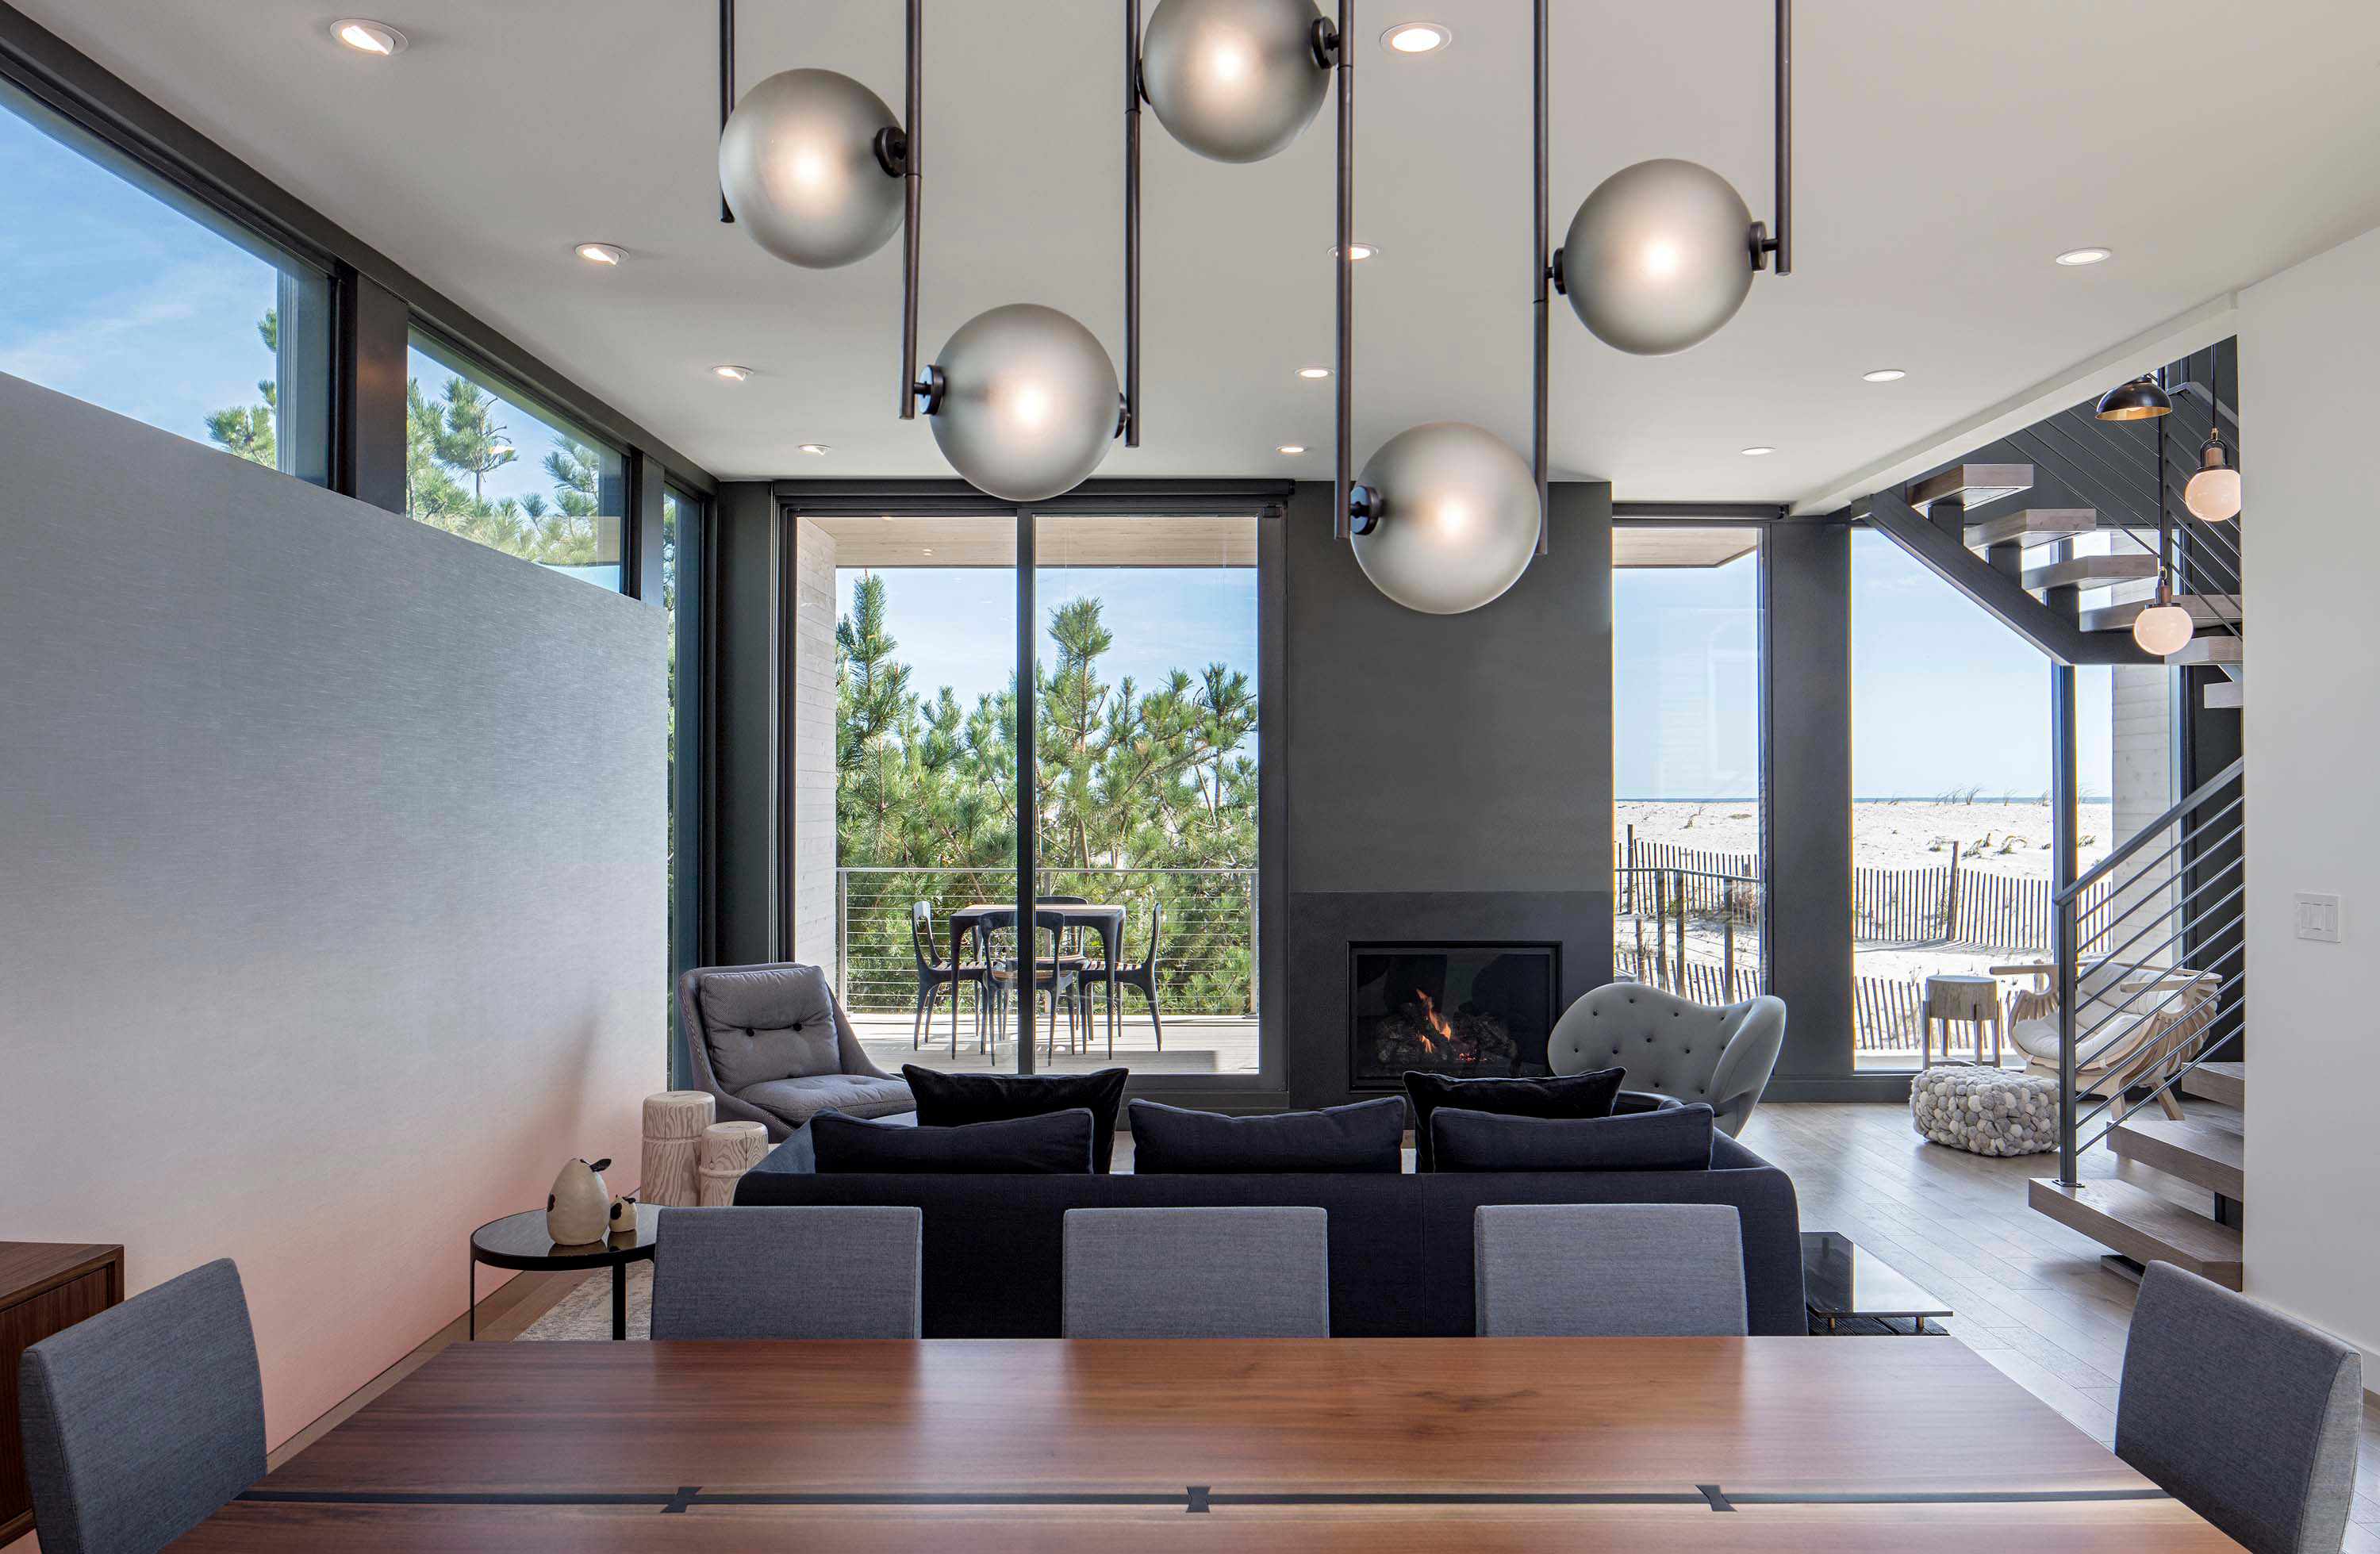 Interior photo of the Beach Haven Residence by Specht Novak Architects. Shot by Taggart Sorenson featuring a spacious dining area, lounging area with fireplace, and the beach in the background.